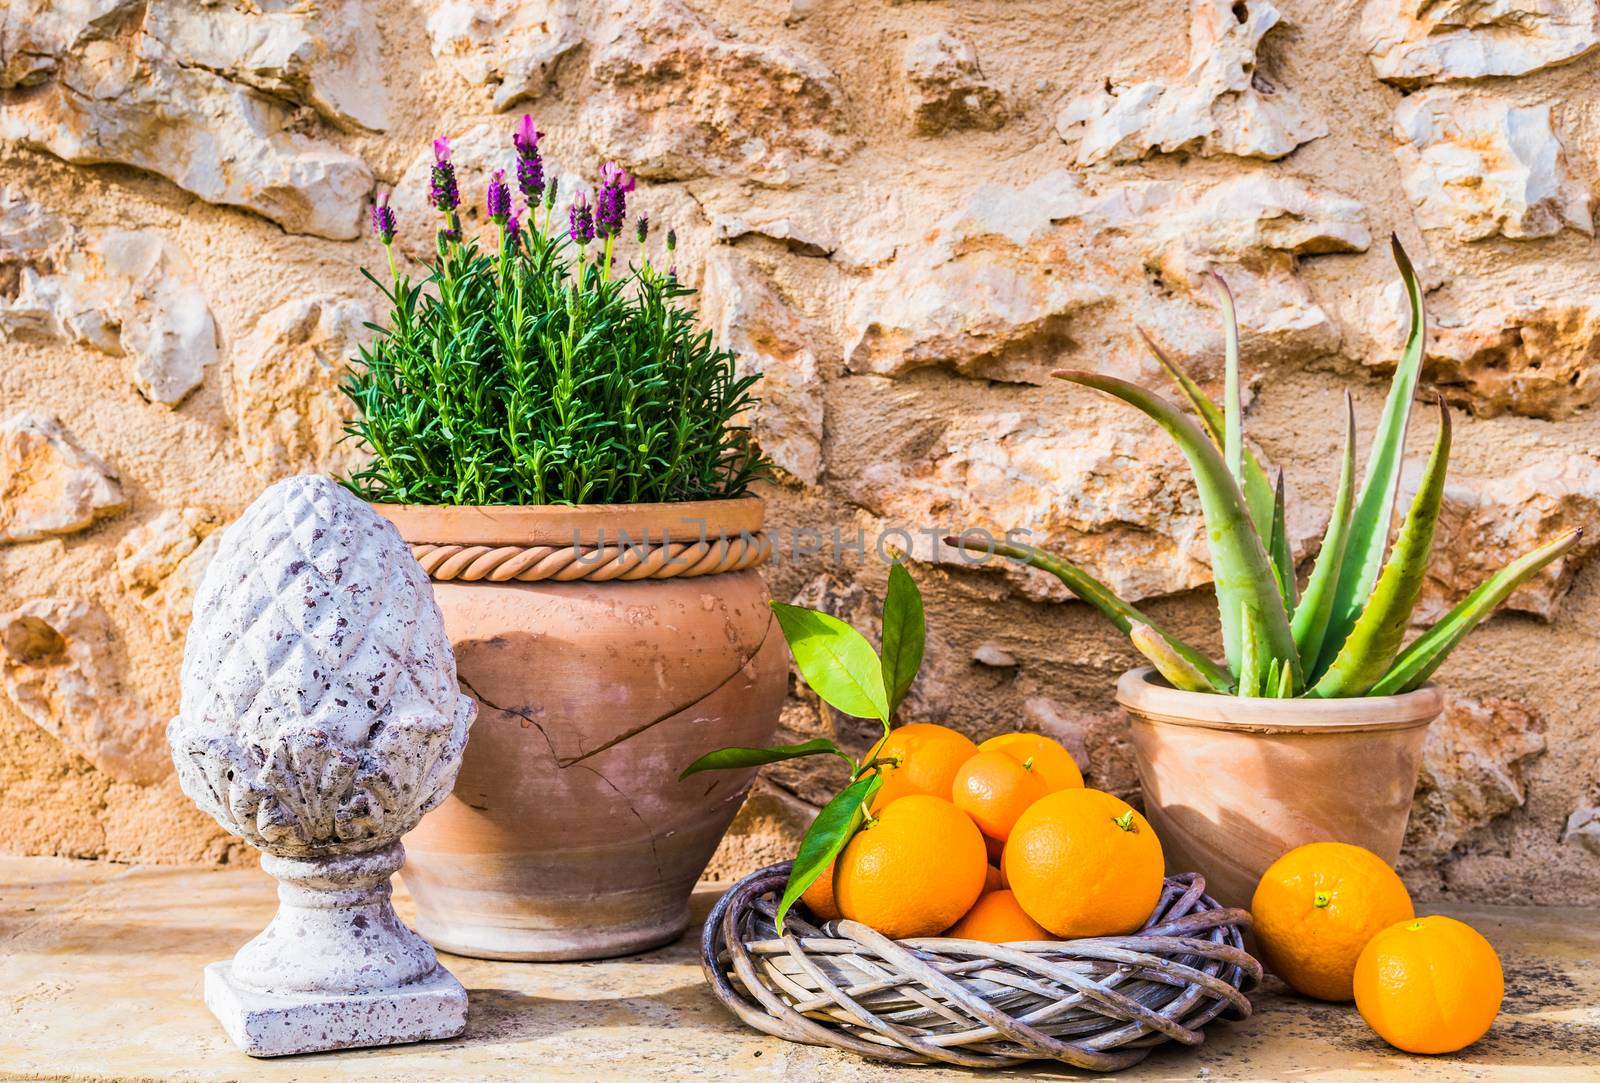 Beautiful provence mediterranean style garden decoration with lavender and tropical fruits by Vulcano